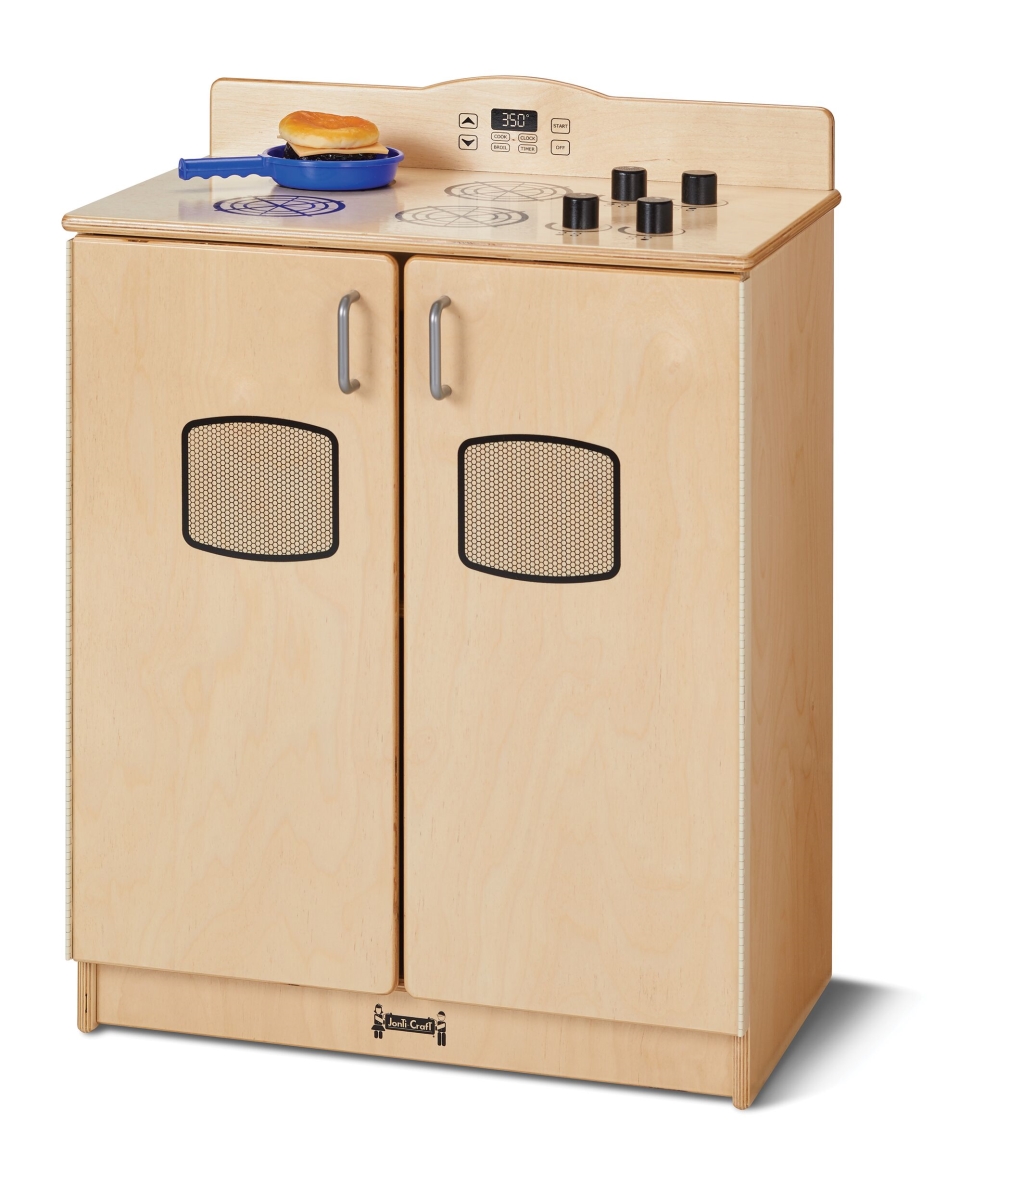 2409sa Culinary Creations School Age Kitchen Stove - 32.5 X 24 X 15 In.